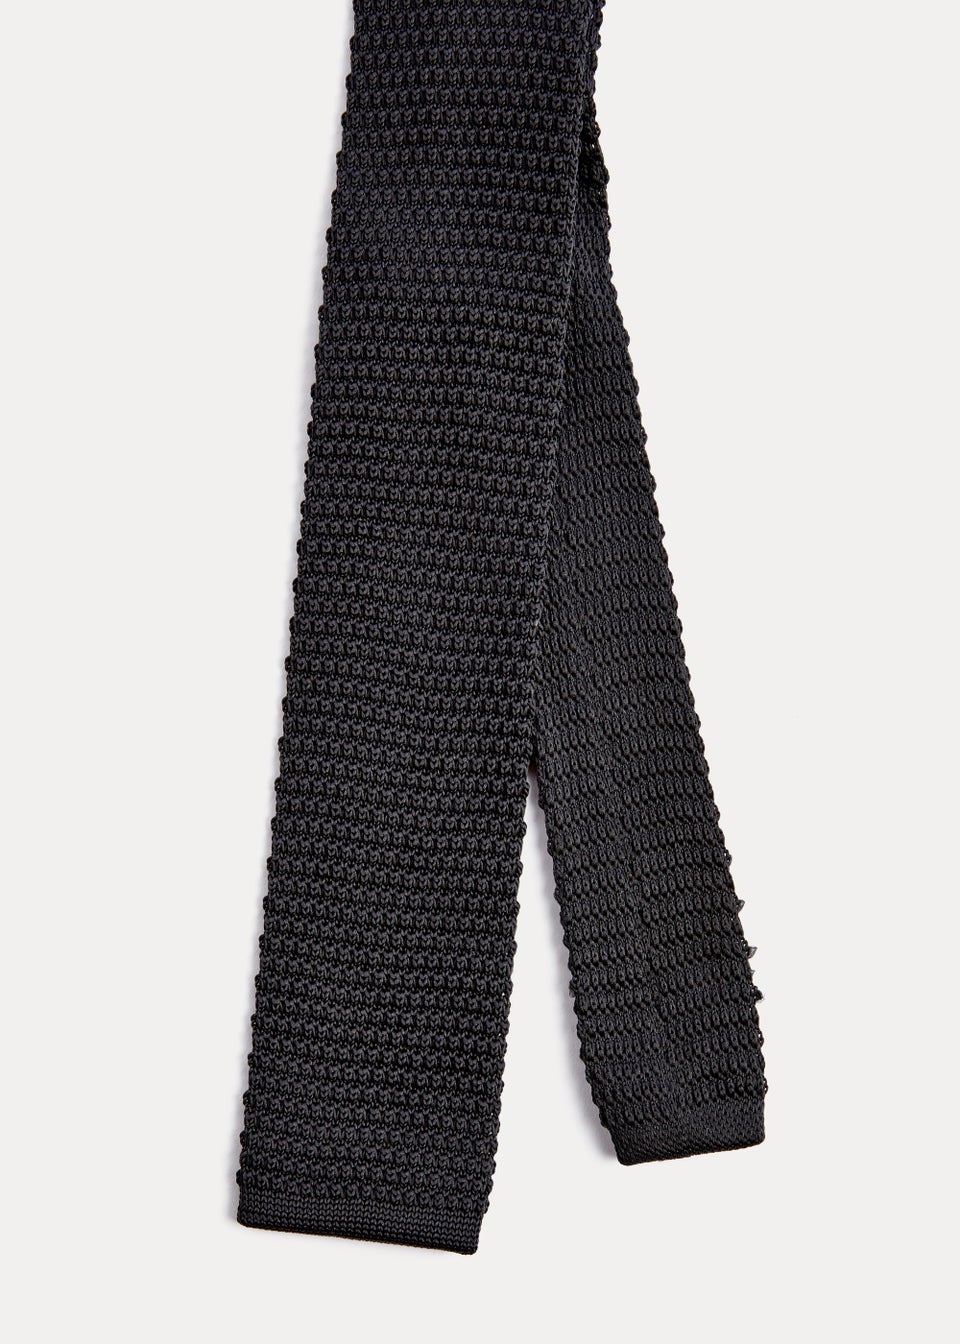 Taylor & Wright Black Knitted Tie